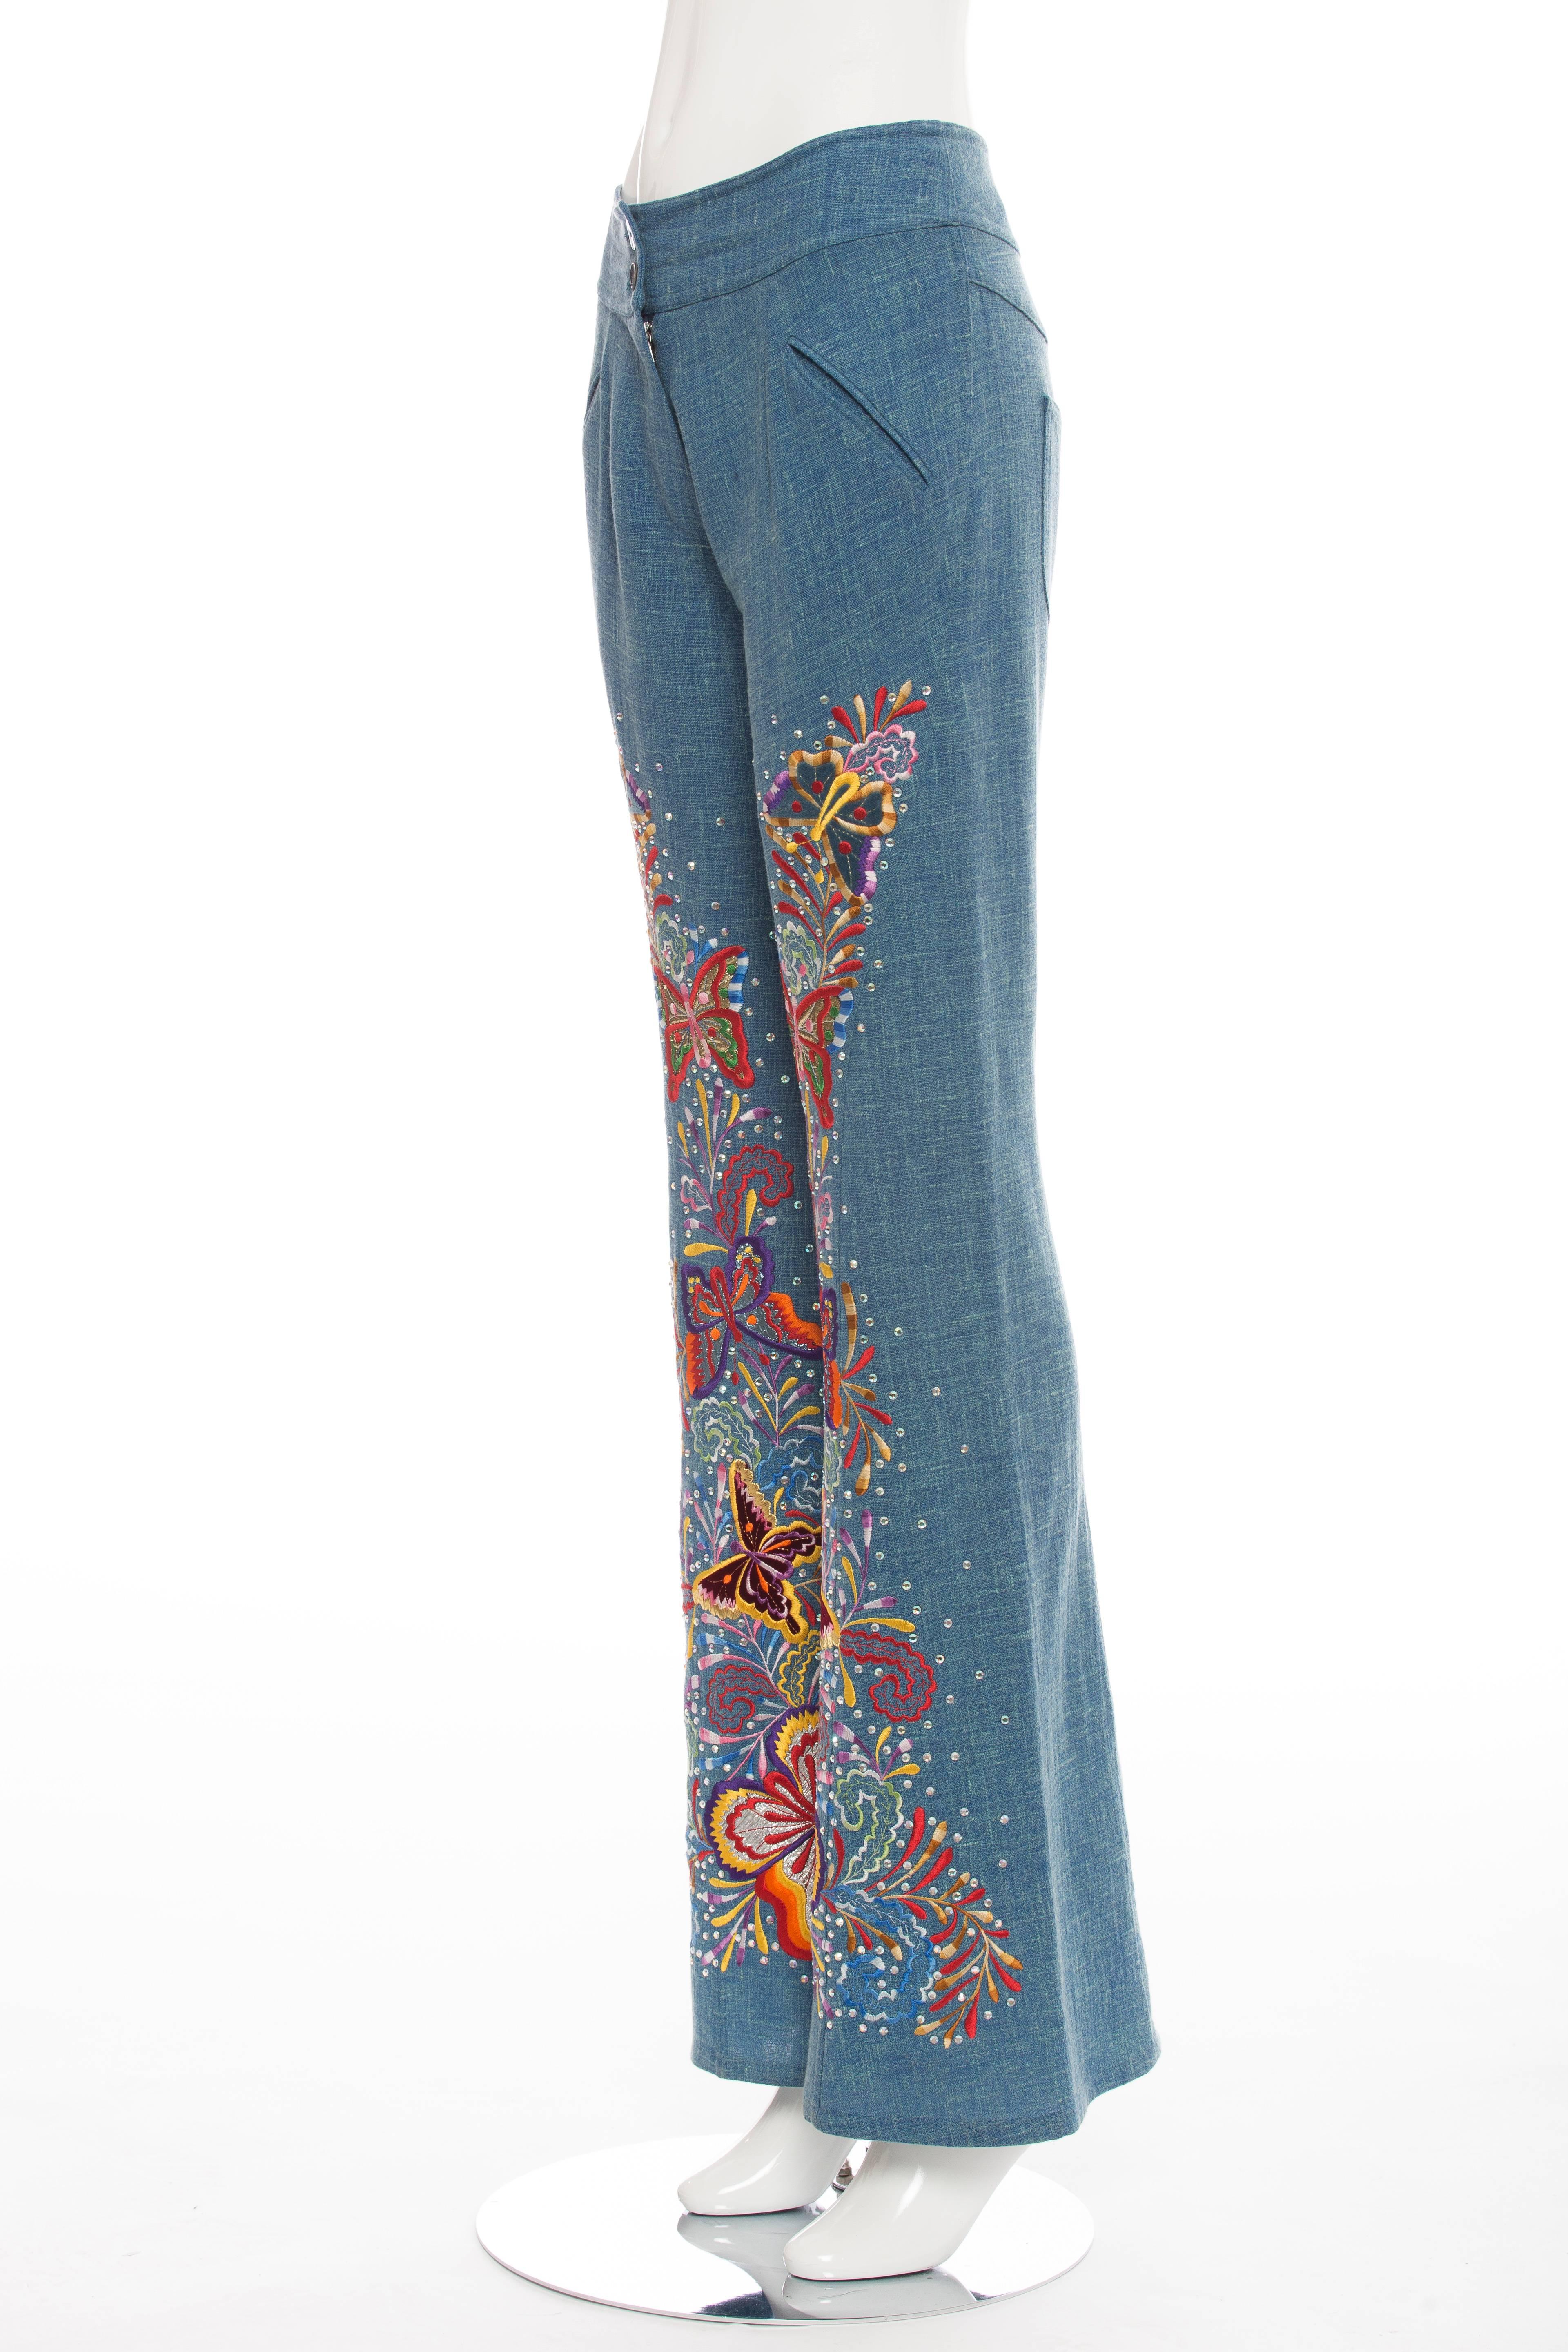 John Galliano For Christian Dior Embroidered Linen Pants, Spring - Summer 2002 1